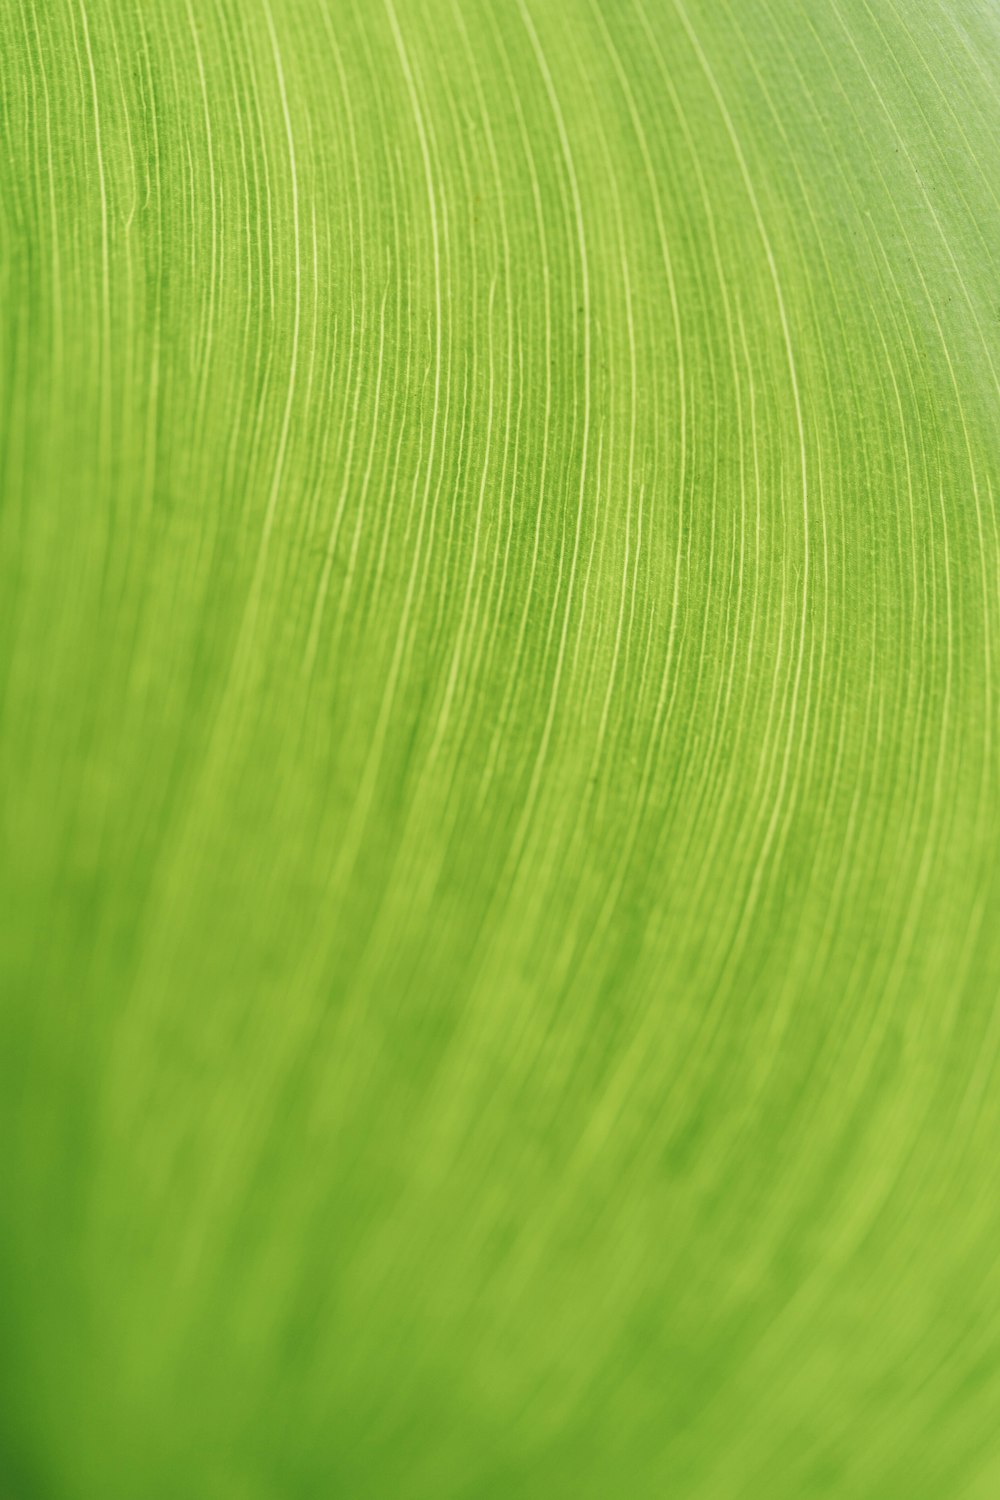 a close up of a green leaf texture